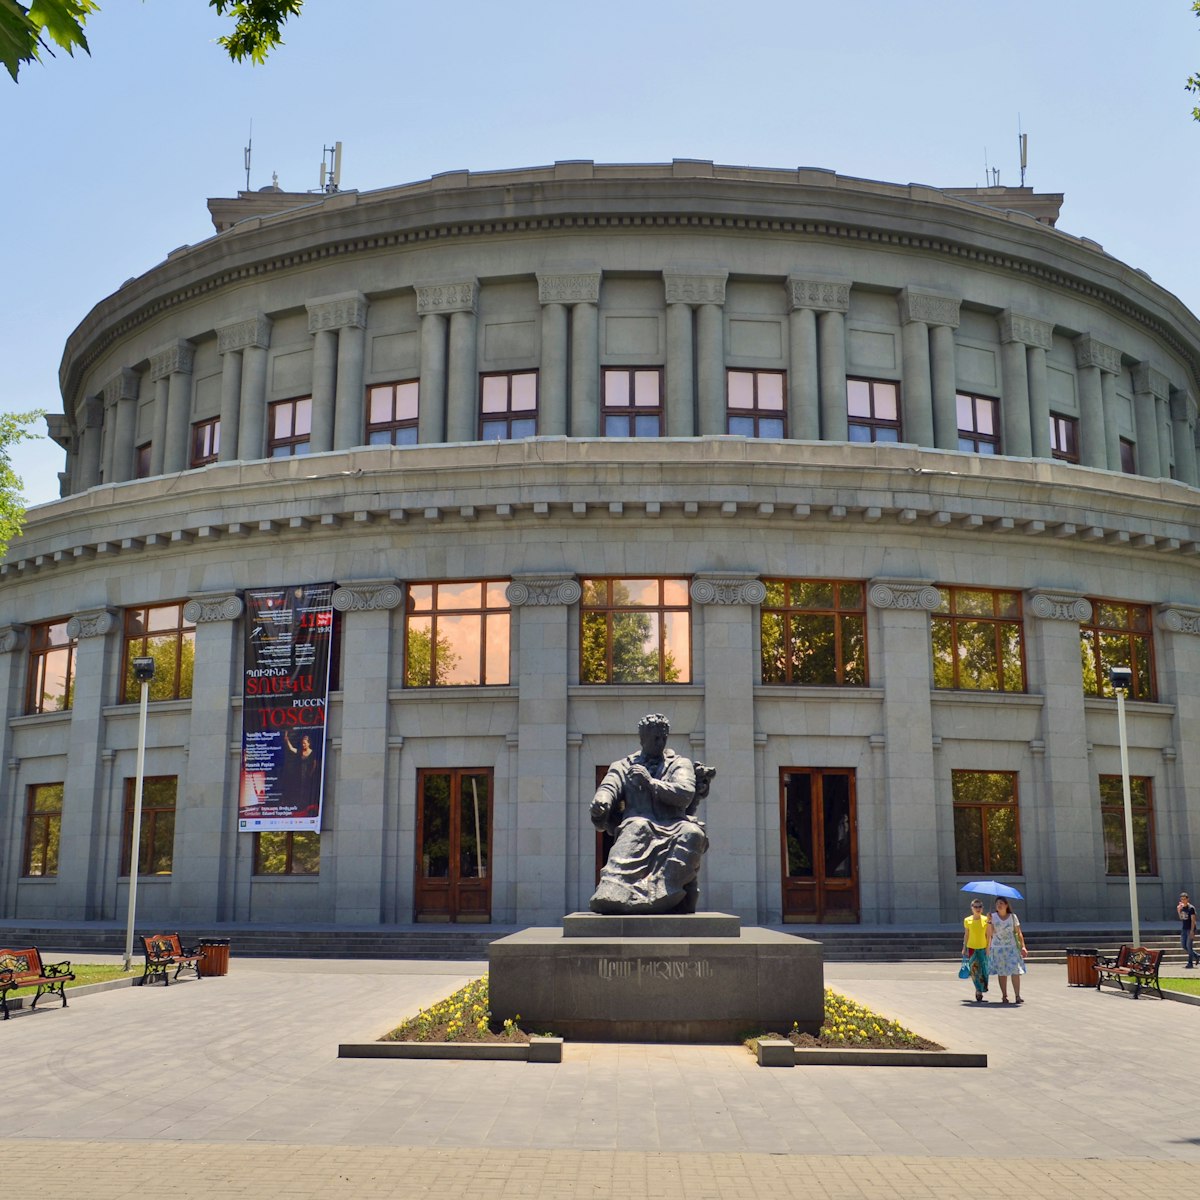 YEREVAN, ARMENIA -  June 30, 2014:Armenian Academic Opera and Ballet Theatre. A. Spendiarova. The city Yerevan has a population of 1 million people; Shutterstock ID 203187289; Your name (First / Last): Gemma Graham; GL account no.: 65050; Netsuite department name: Online Editorial; Full Product or Project name including edition: 100 Cities Guides app image downloads